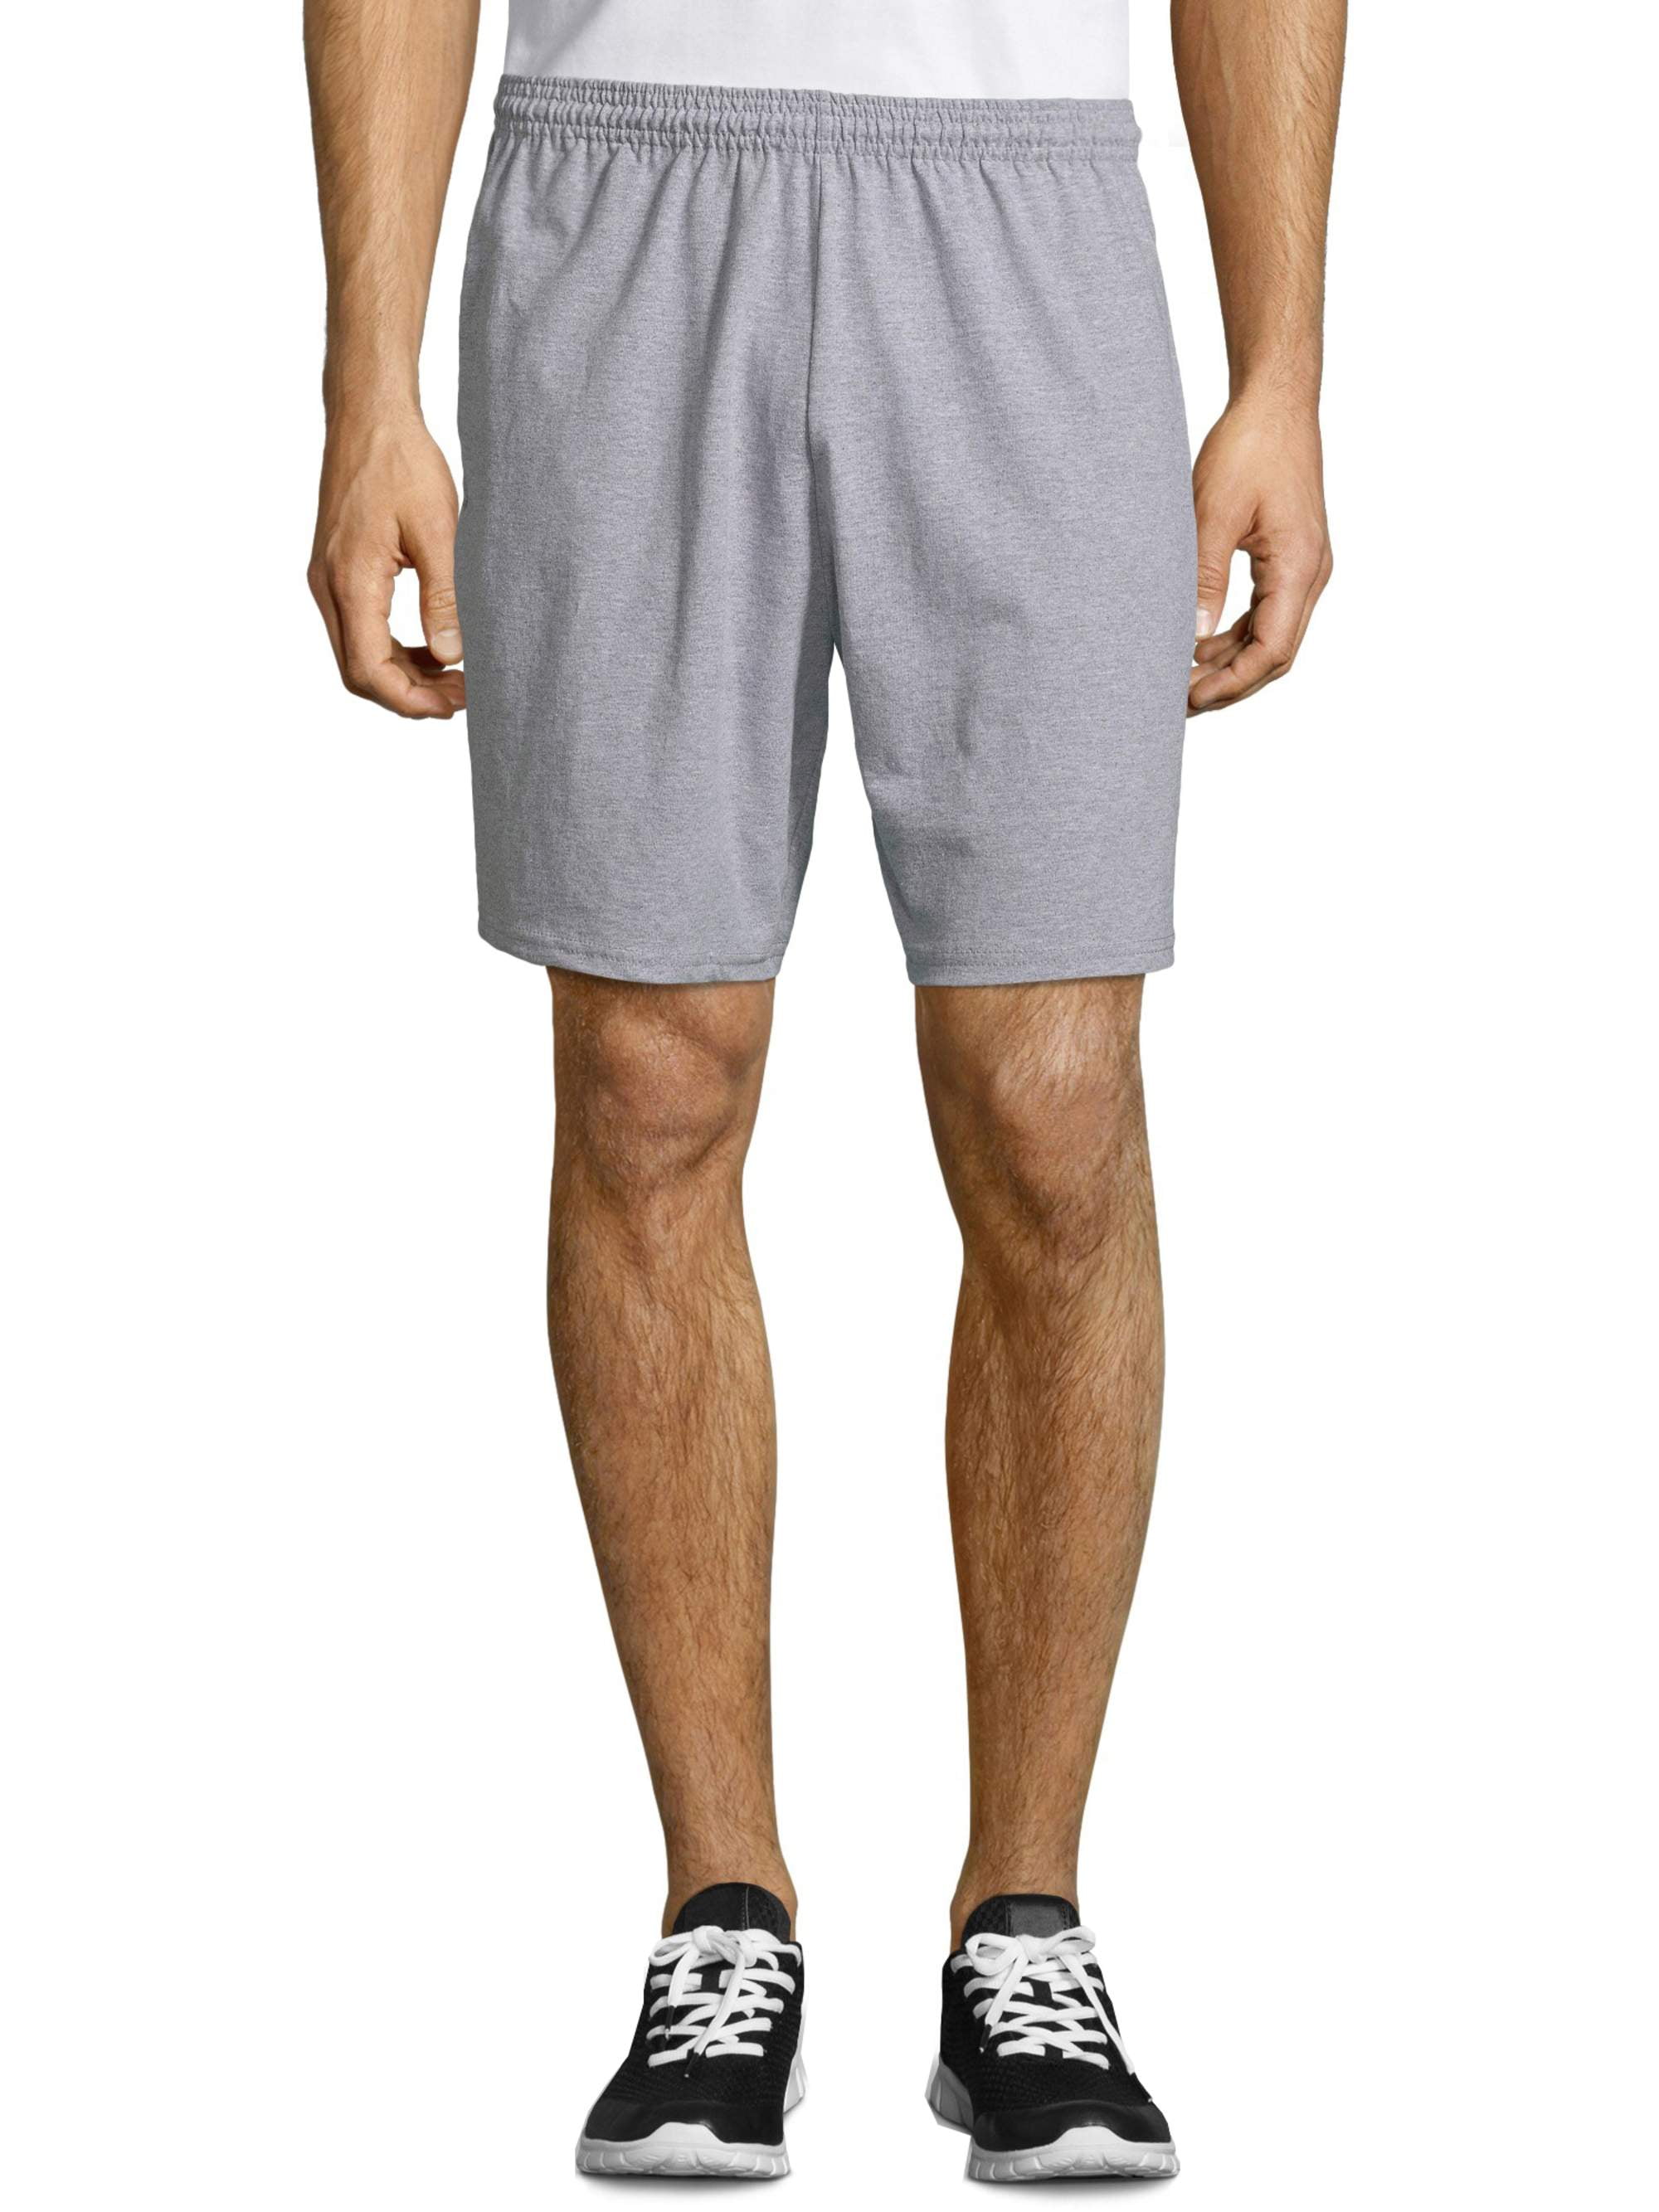 Hanes Men's Cotton Jersey Short With Pockets,Charcoal Heather,3X Big 